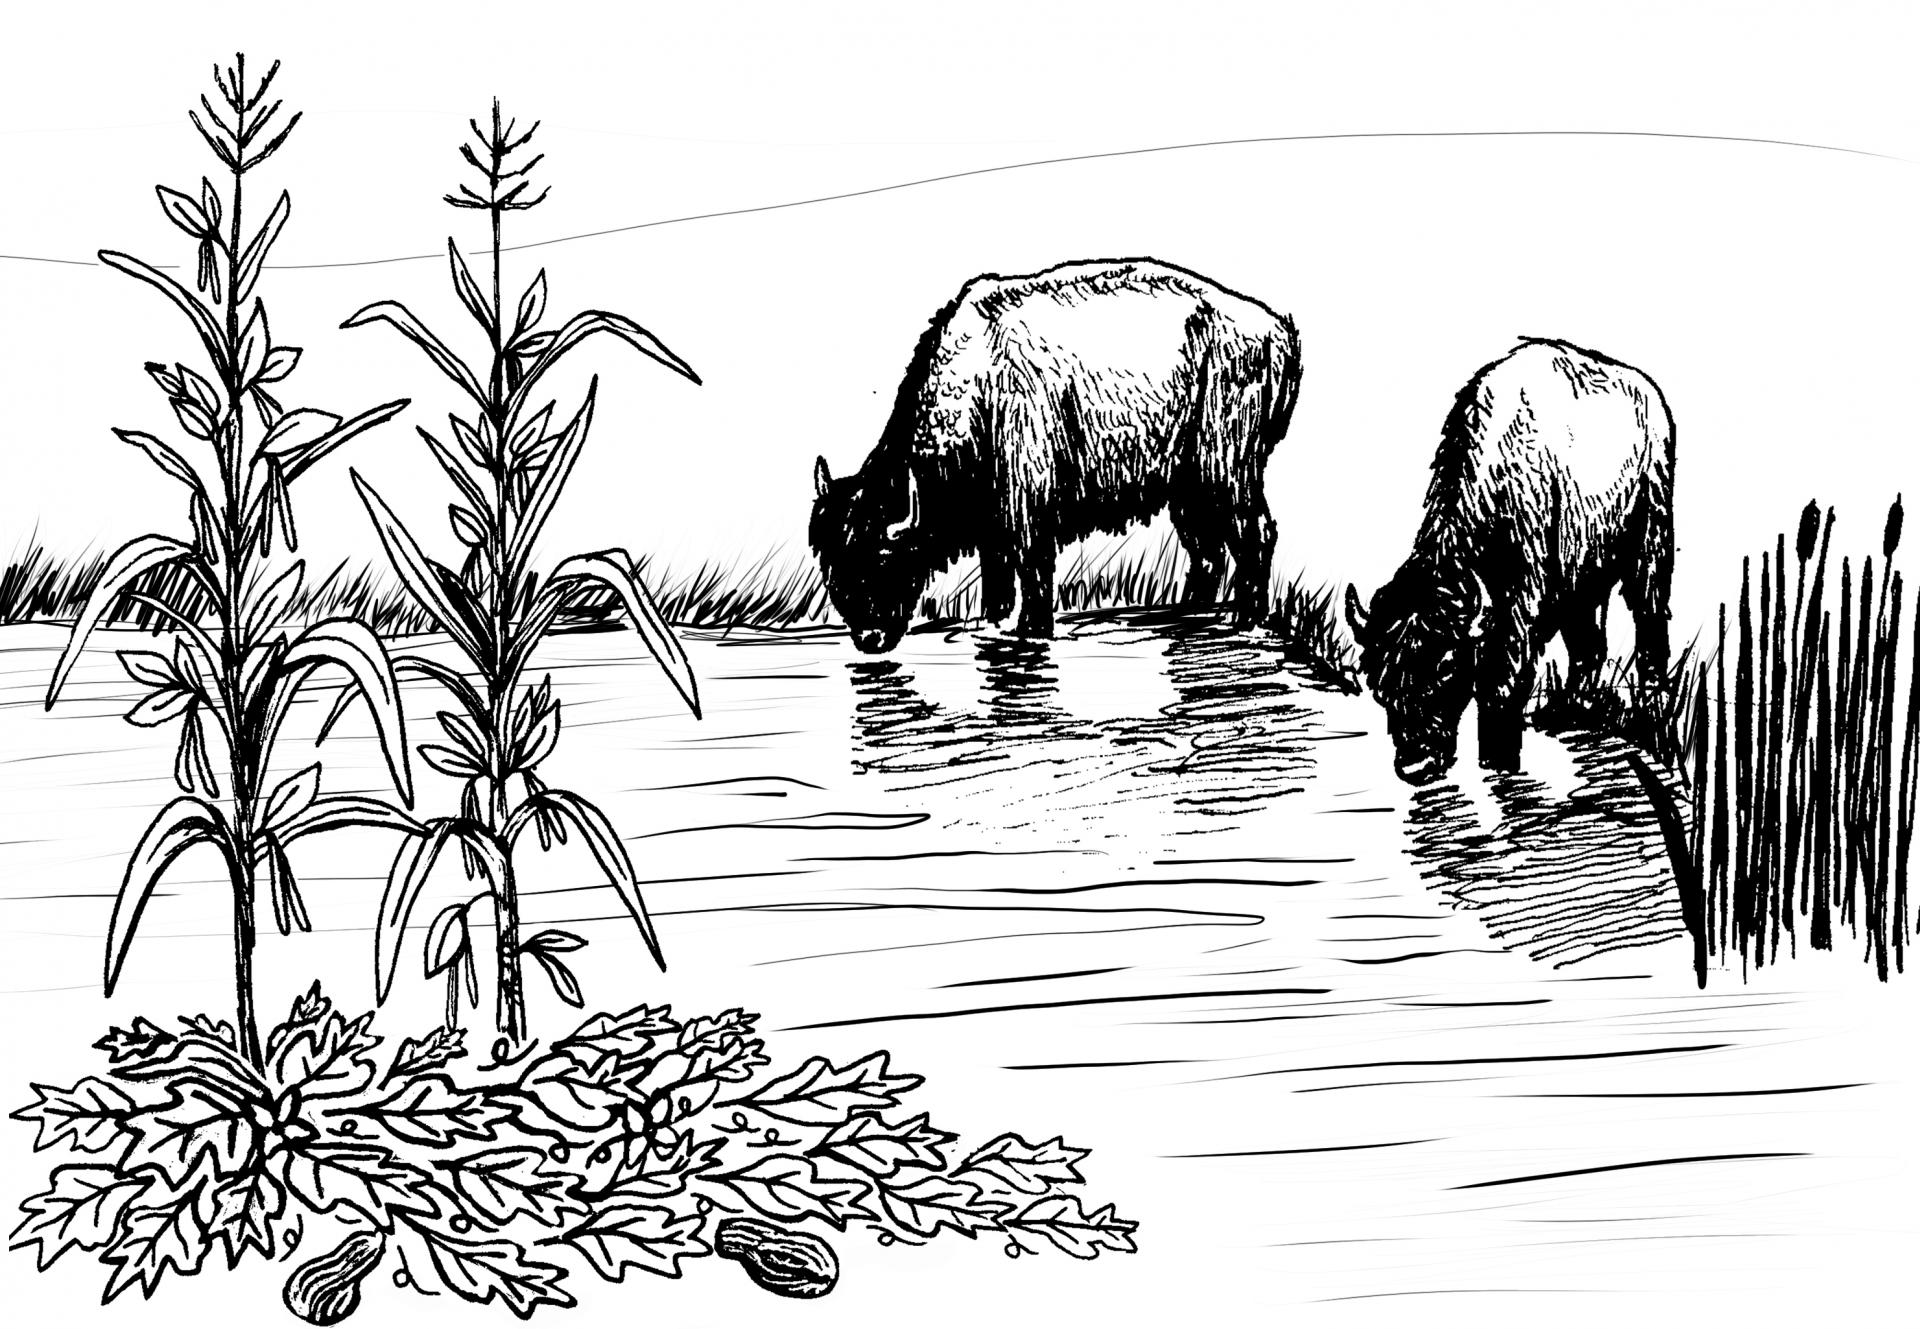 drawing-of-bison-drinking-water-from-river-and-three-sisters-garden